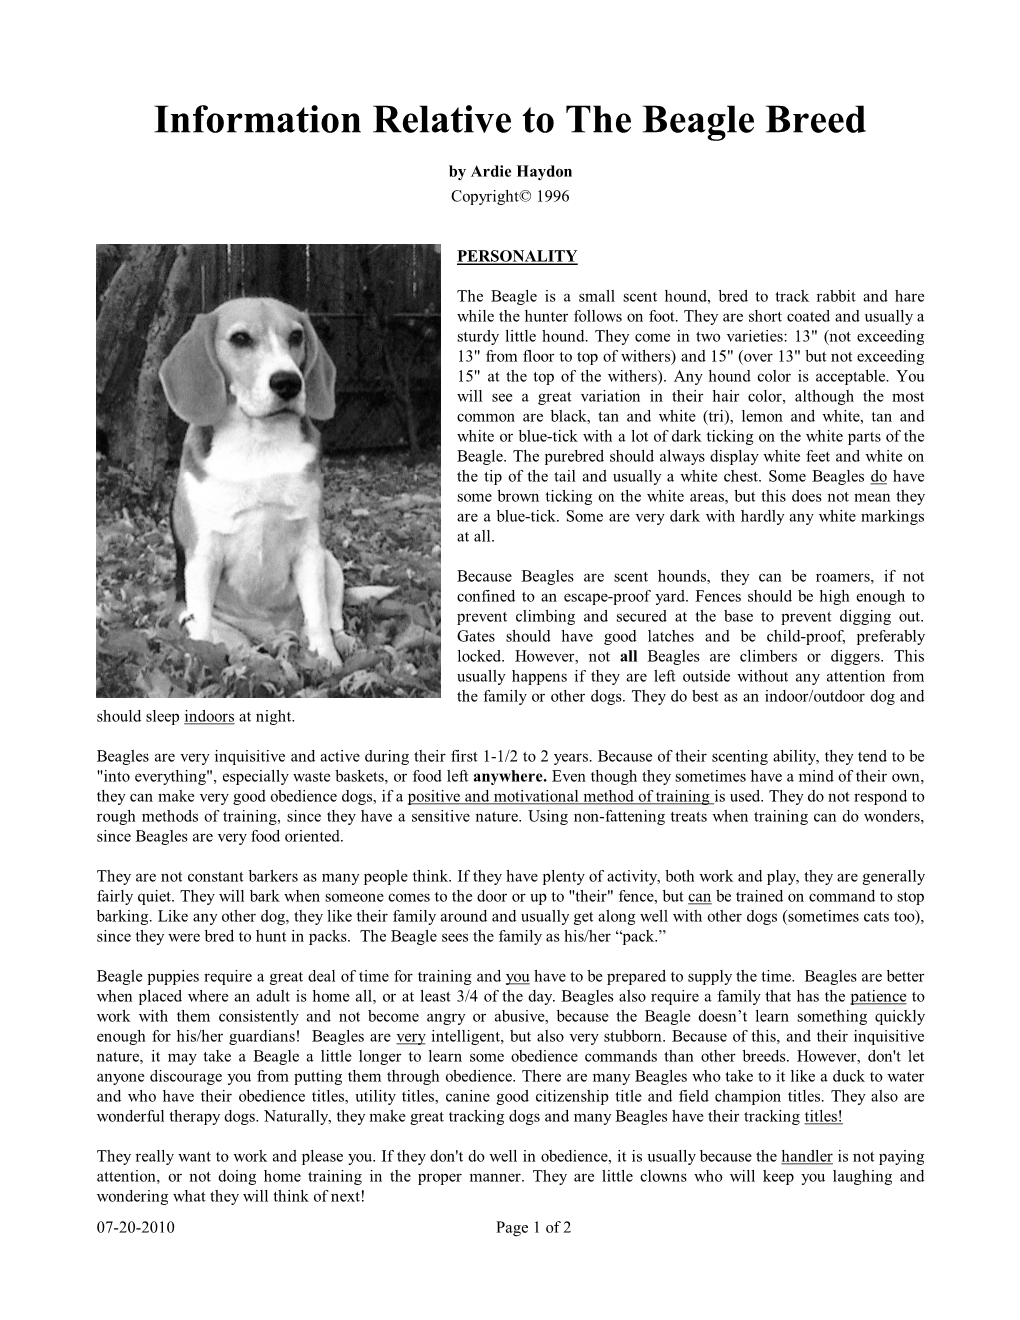 Info Relative to the Beagle Breed